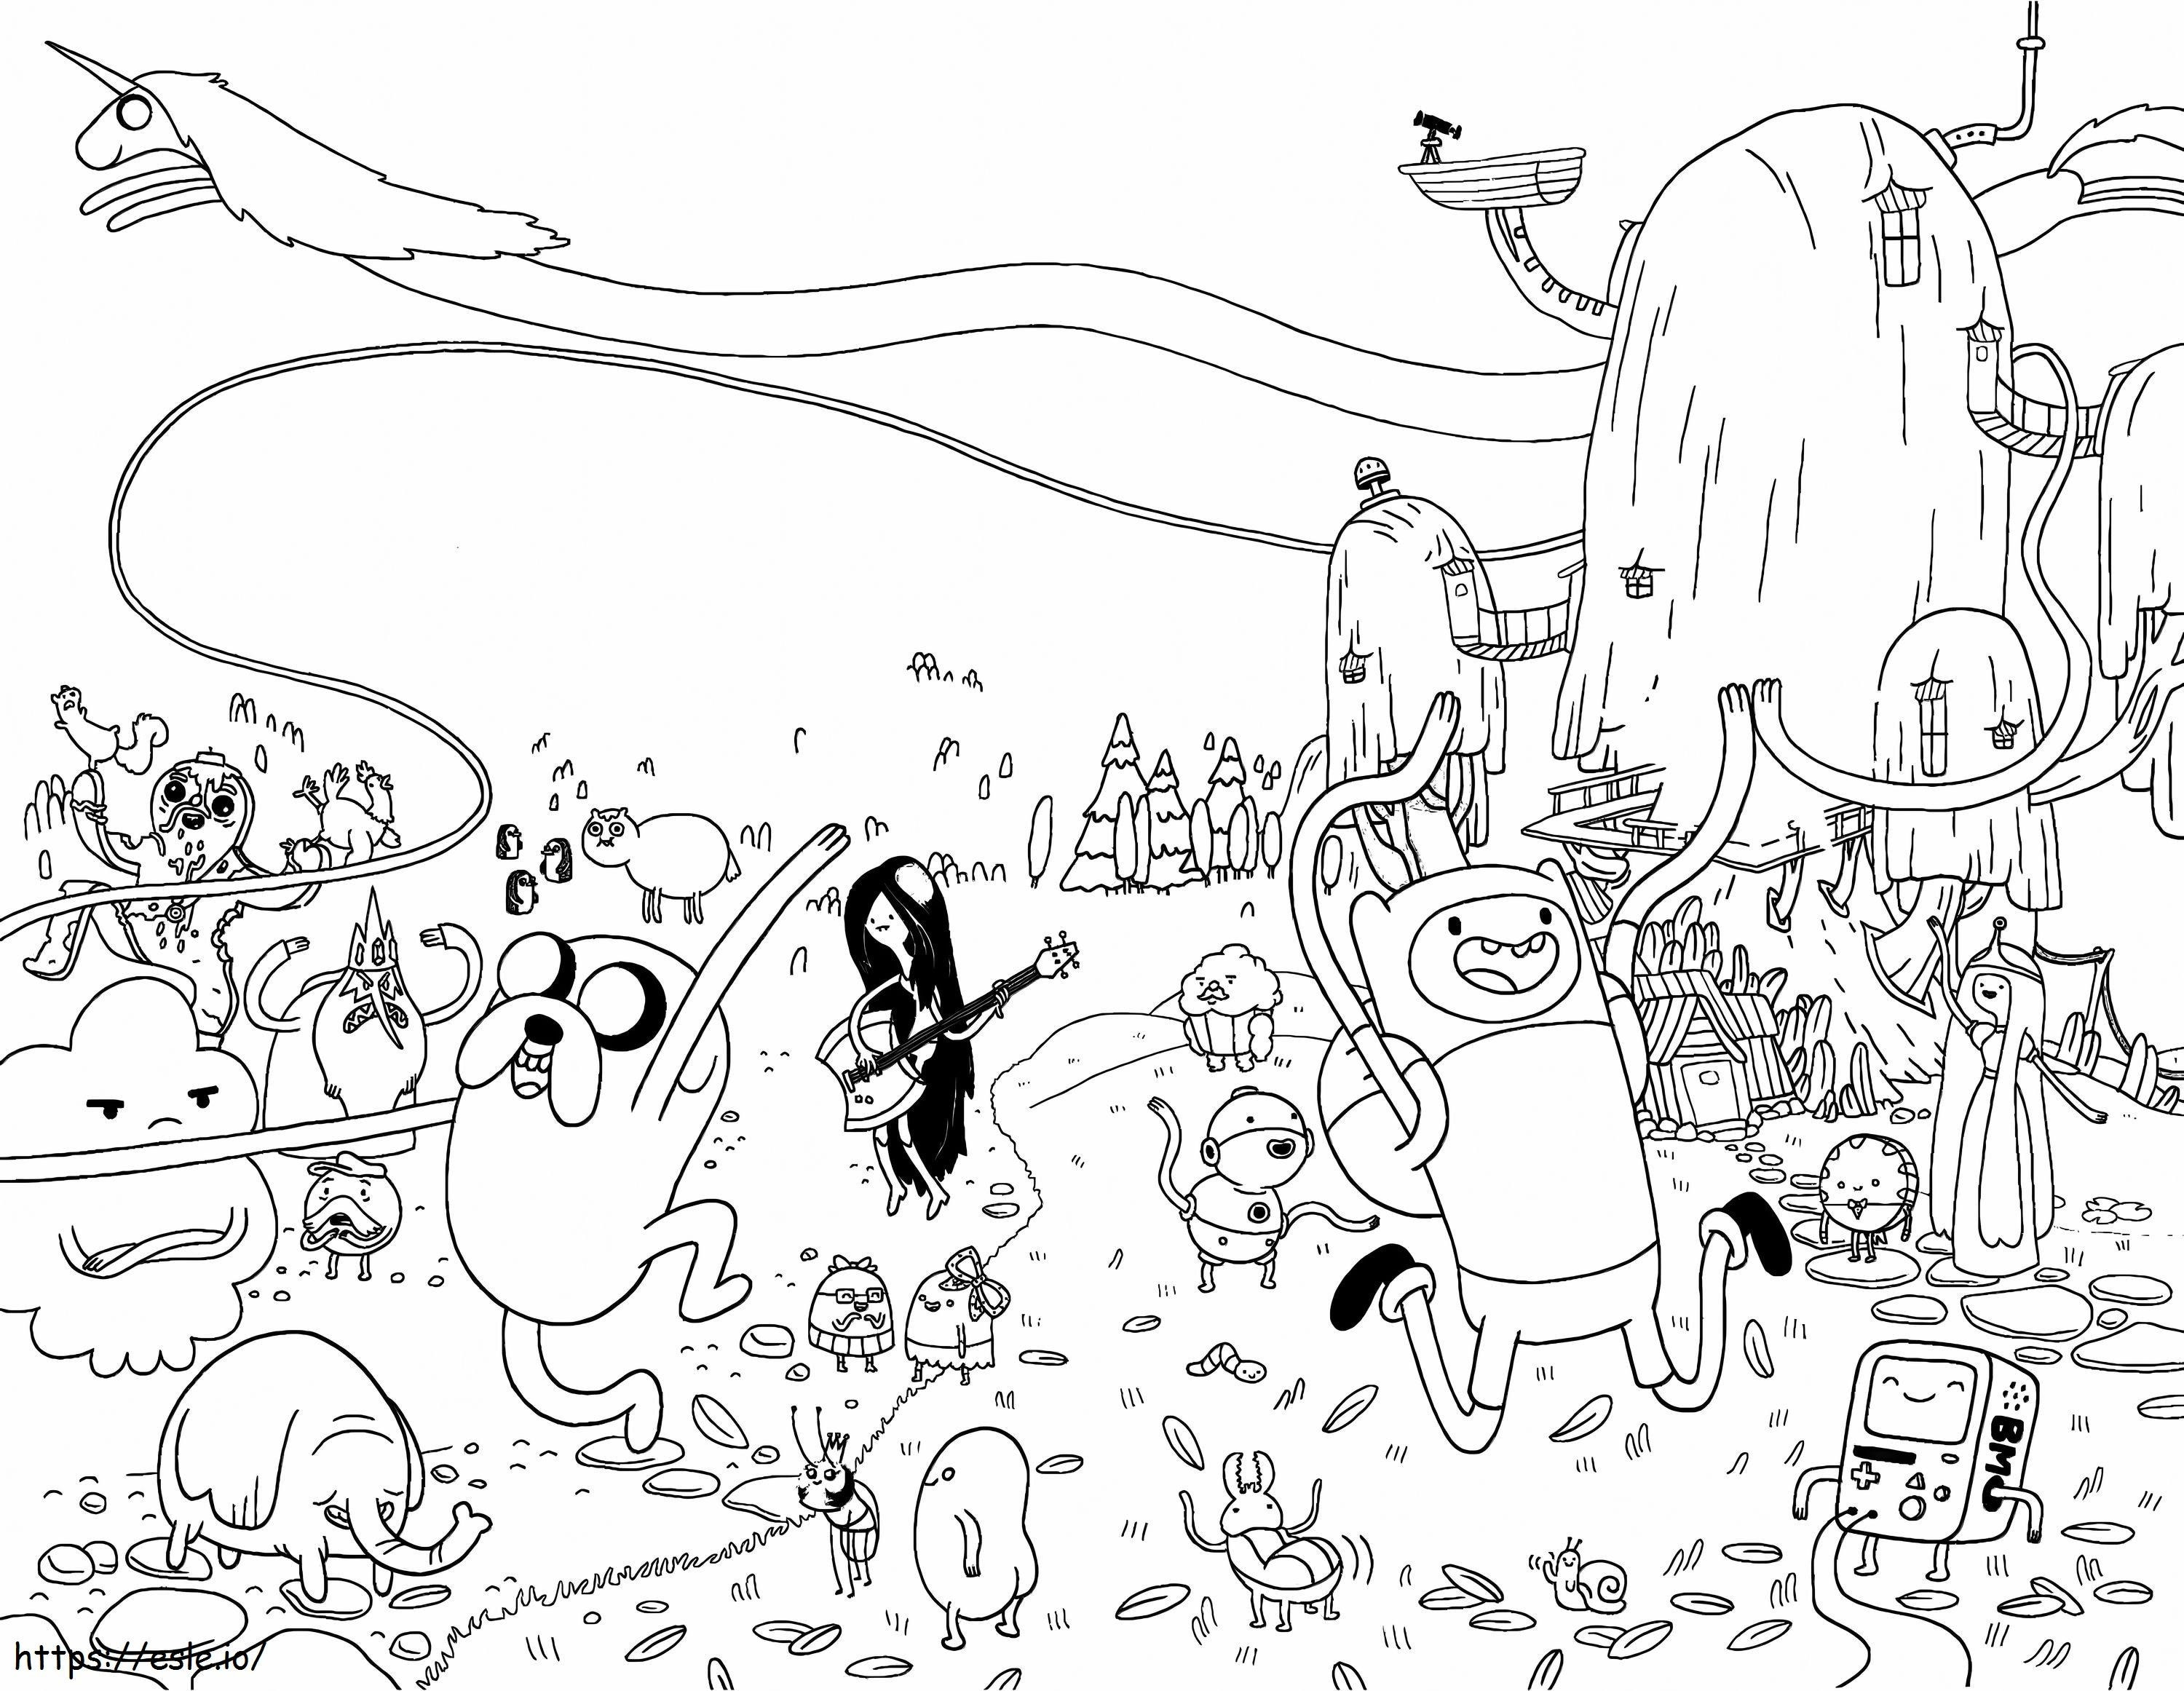 All Happy Adventure Time Characters coloring page